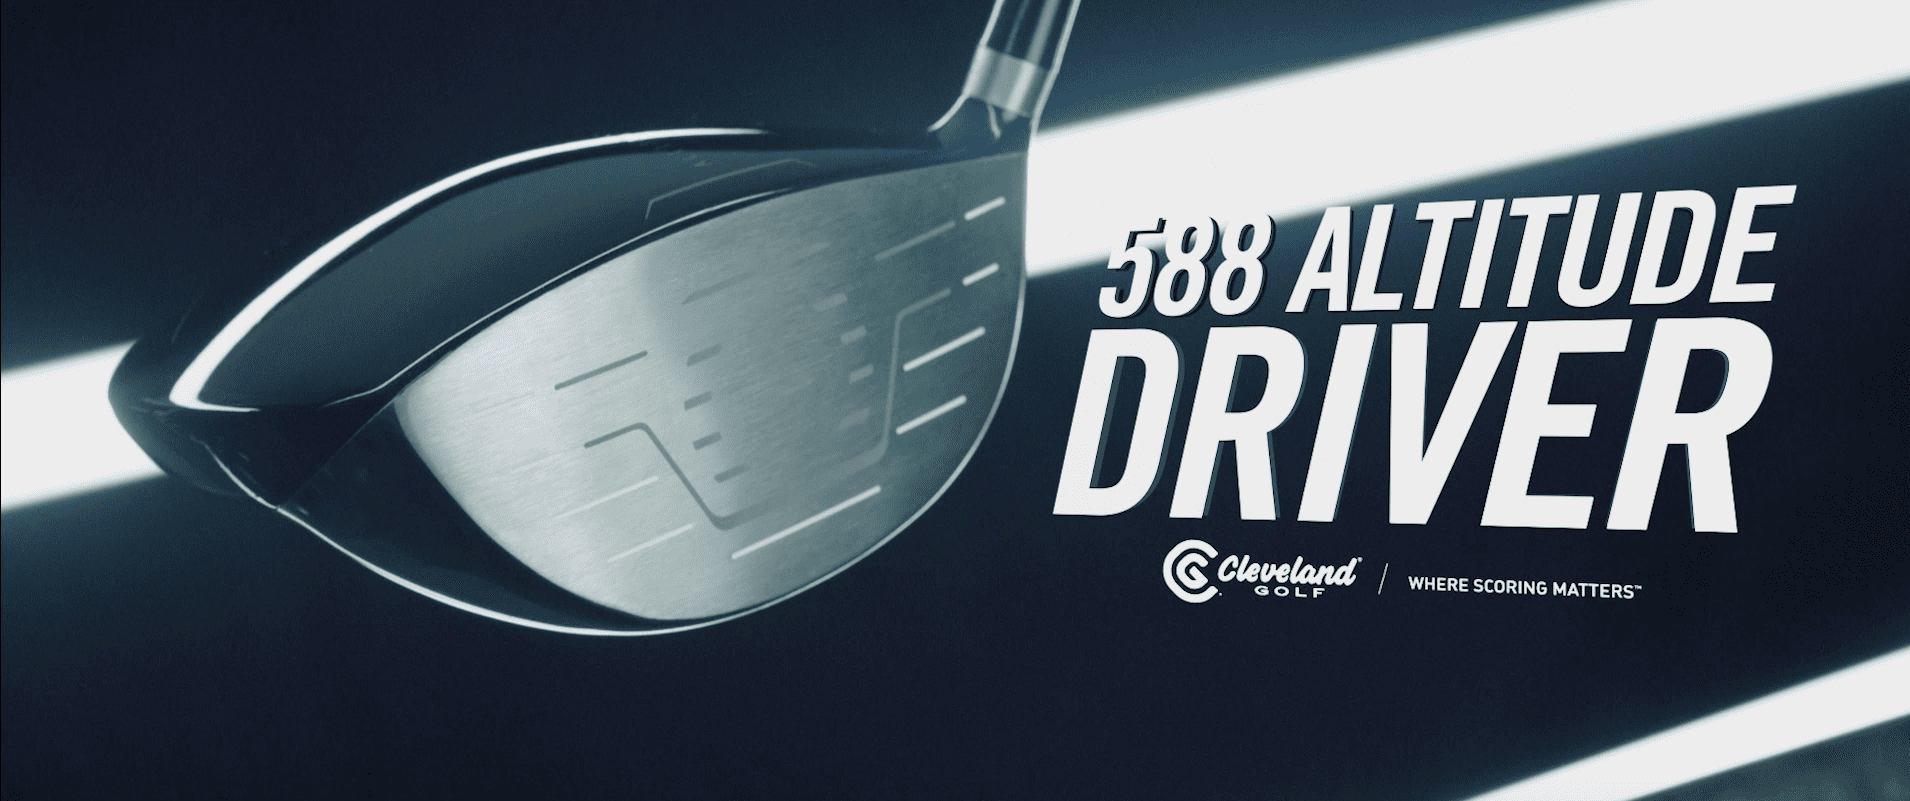 Play Cleveland Golf 588 Altitude Driver commercial